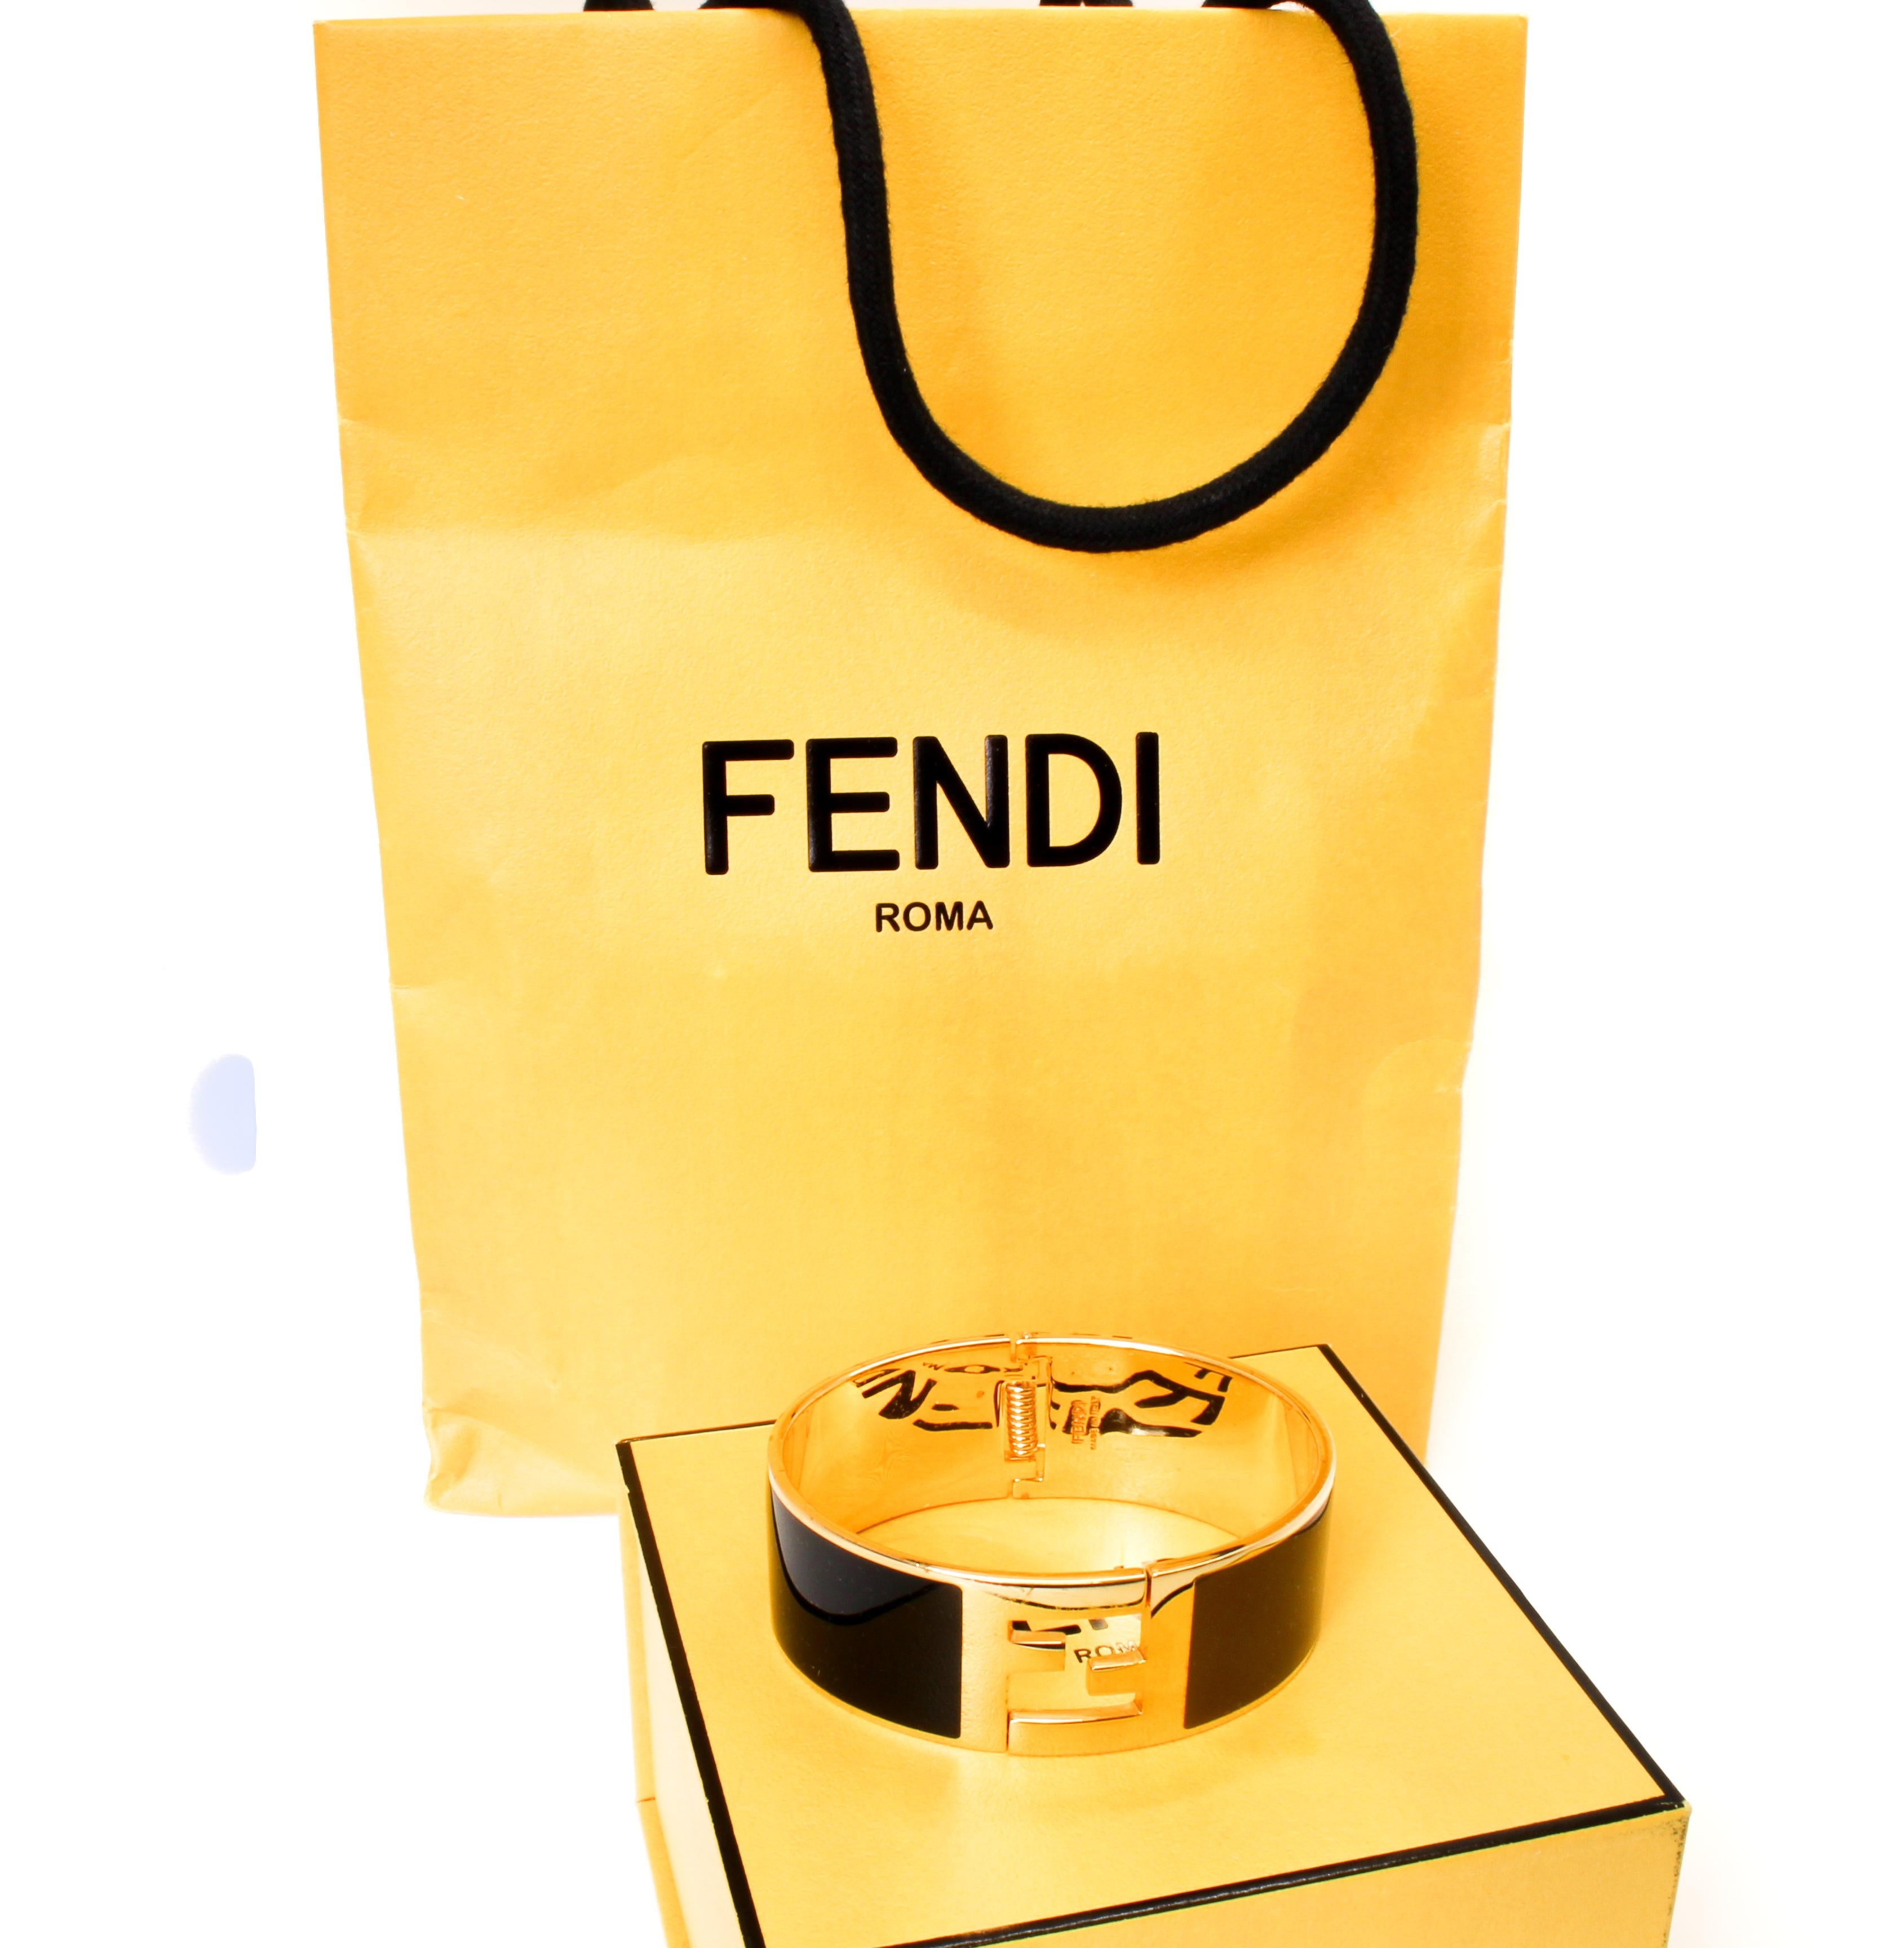 Fendi 'Fendista' enamel cuff bracelet with FF logo closure.

Made out of gold tone metal and blue and brown enamel. Fendi is engraved on the inside. 

Made in Italy.  Comes with orignal box and bag.
 
Measurements: Circumference 6